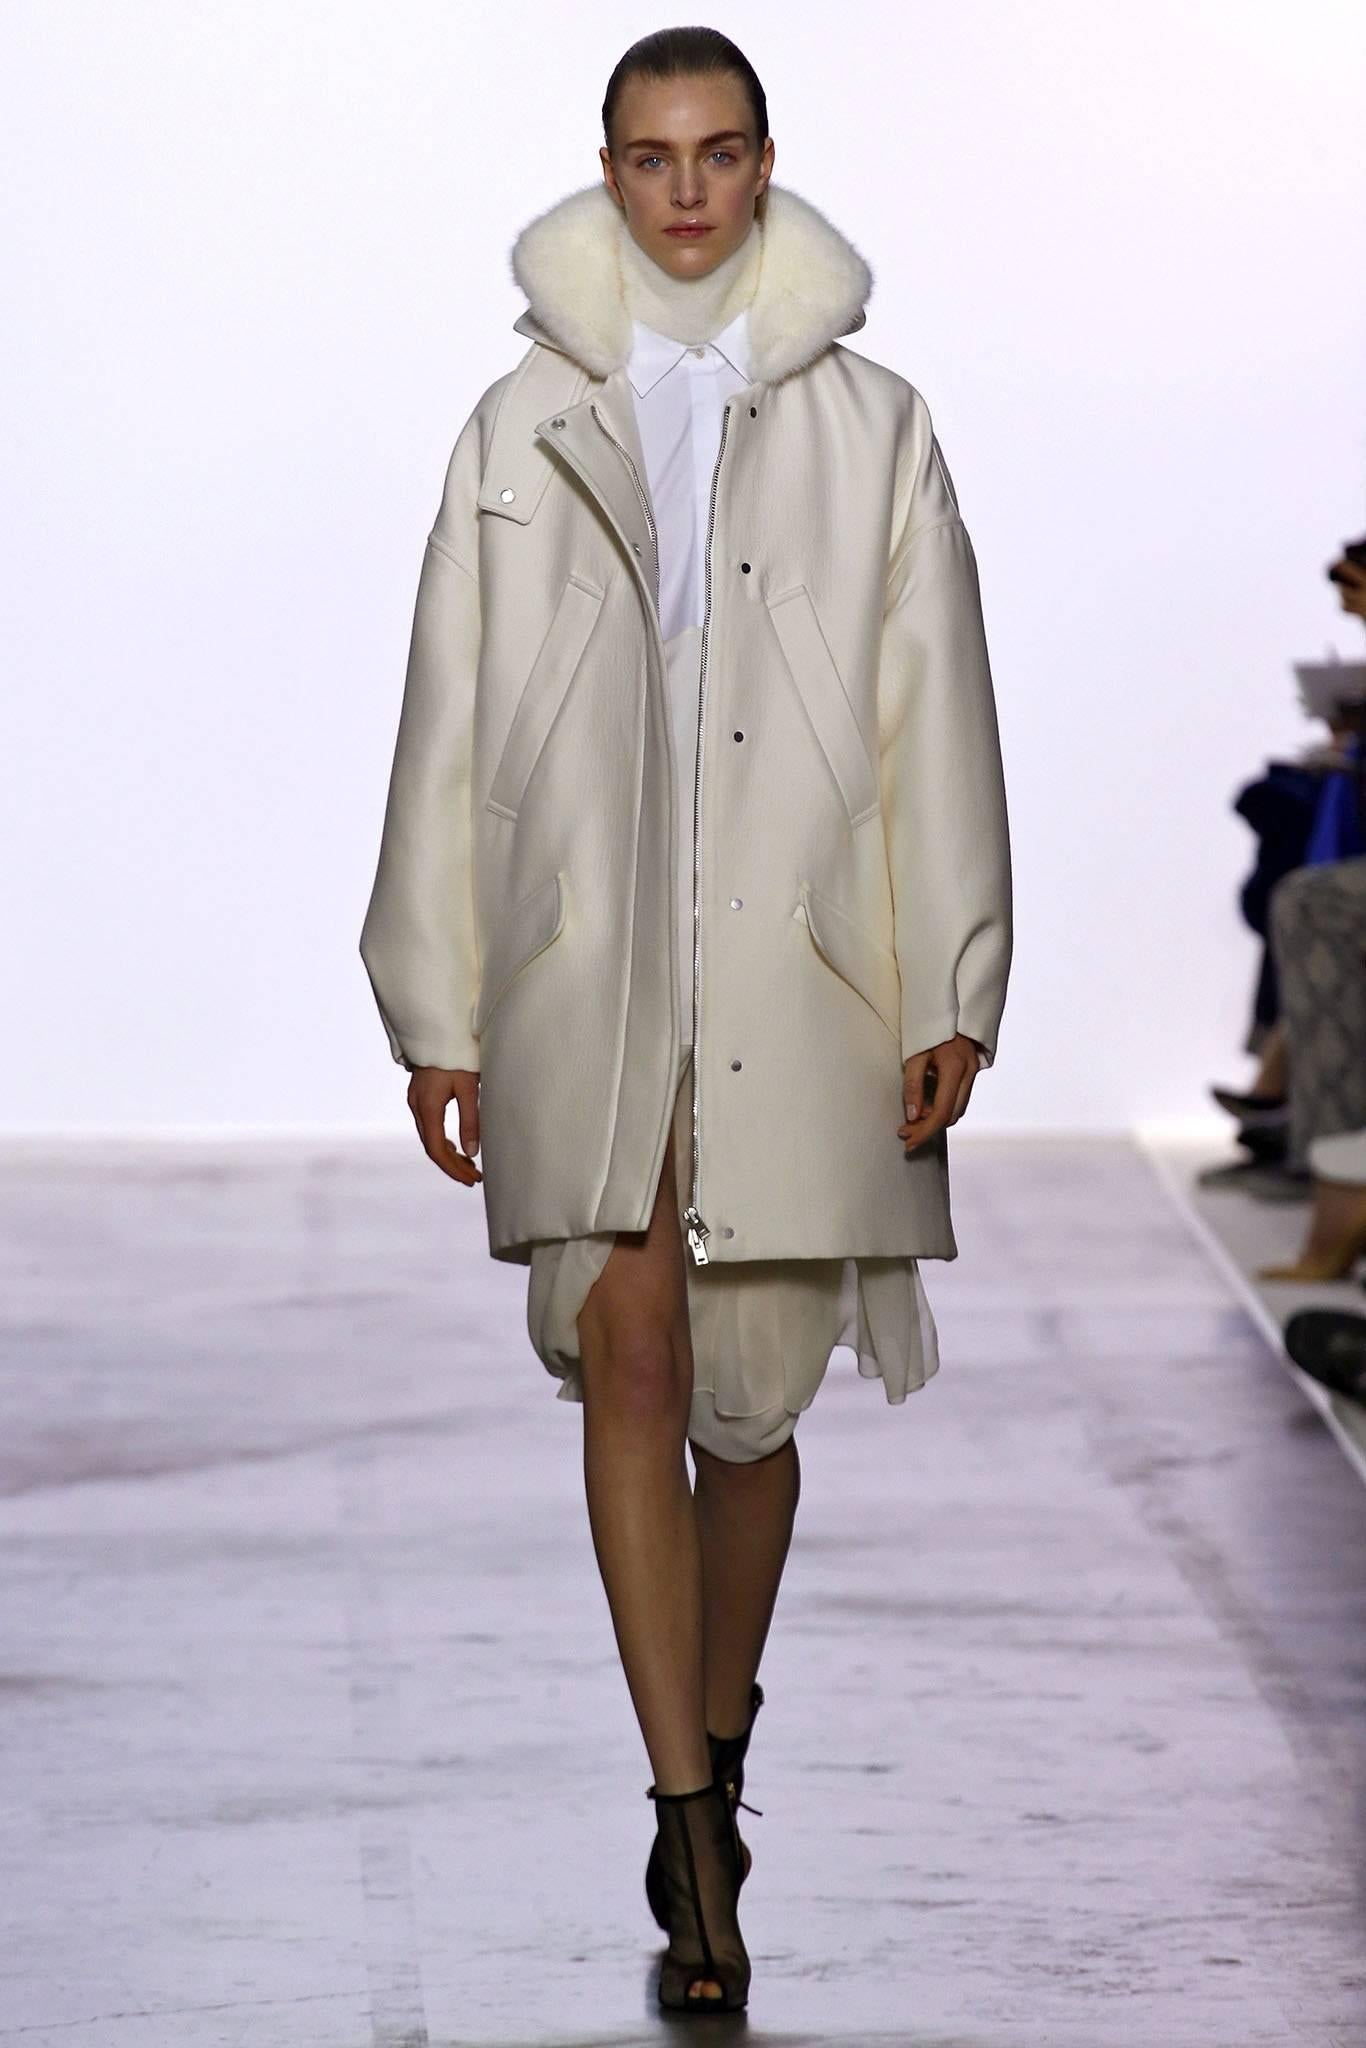 Giambattista Vali Winter White Parka Coat with Fox Fur Trim.  Fall 2013 runway collection.  Original retail price $6690.  Centre front zipper, side hip pockets, silvertone metal snaps down front and at cuffs.  Tagged size IT 40 USA XS but fits